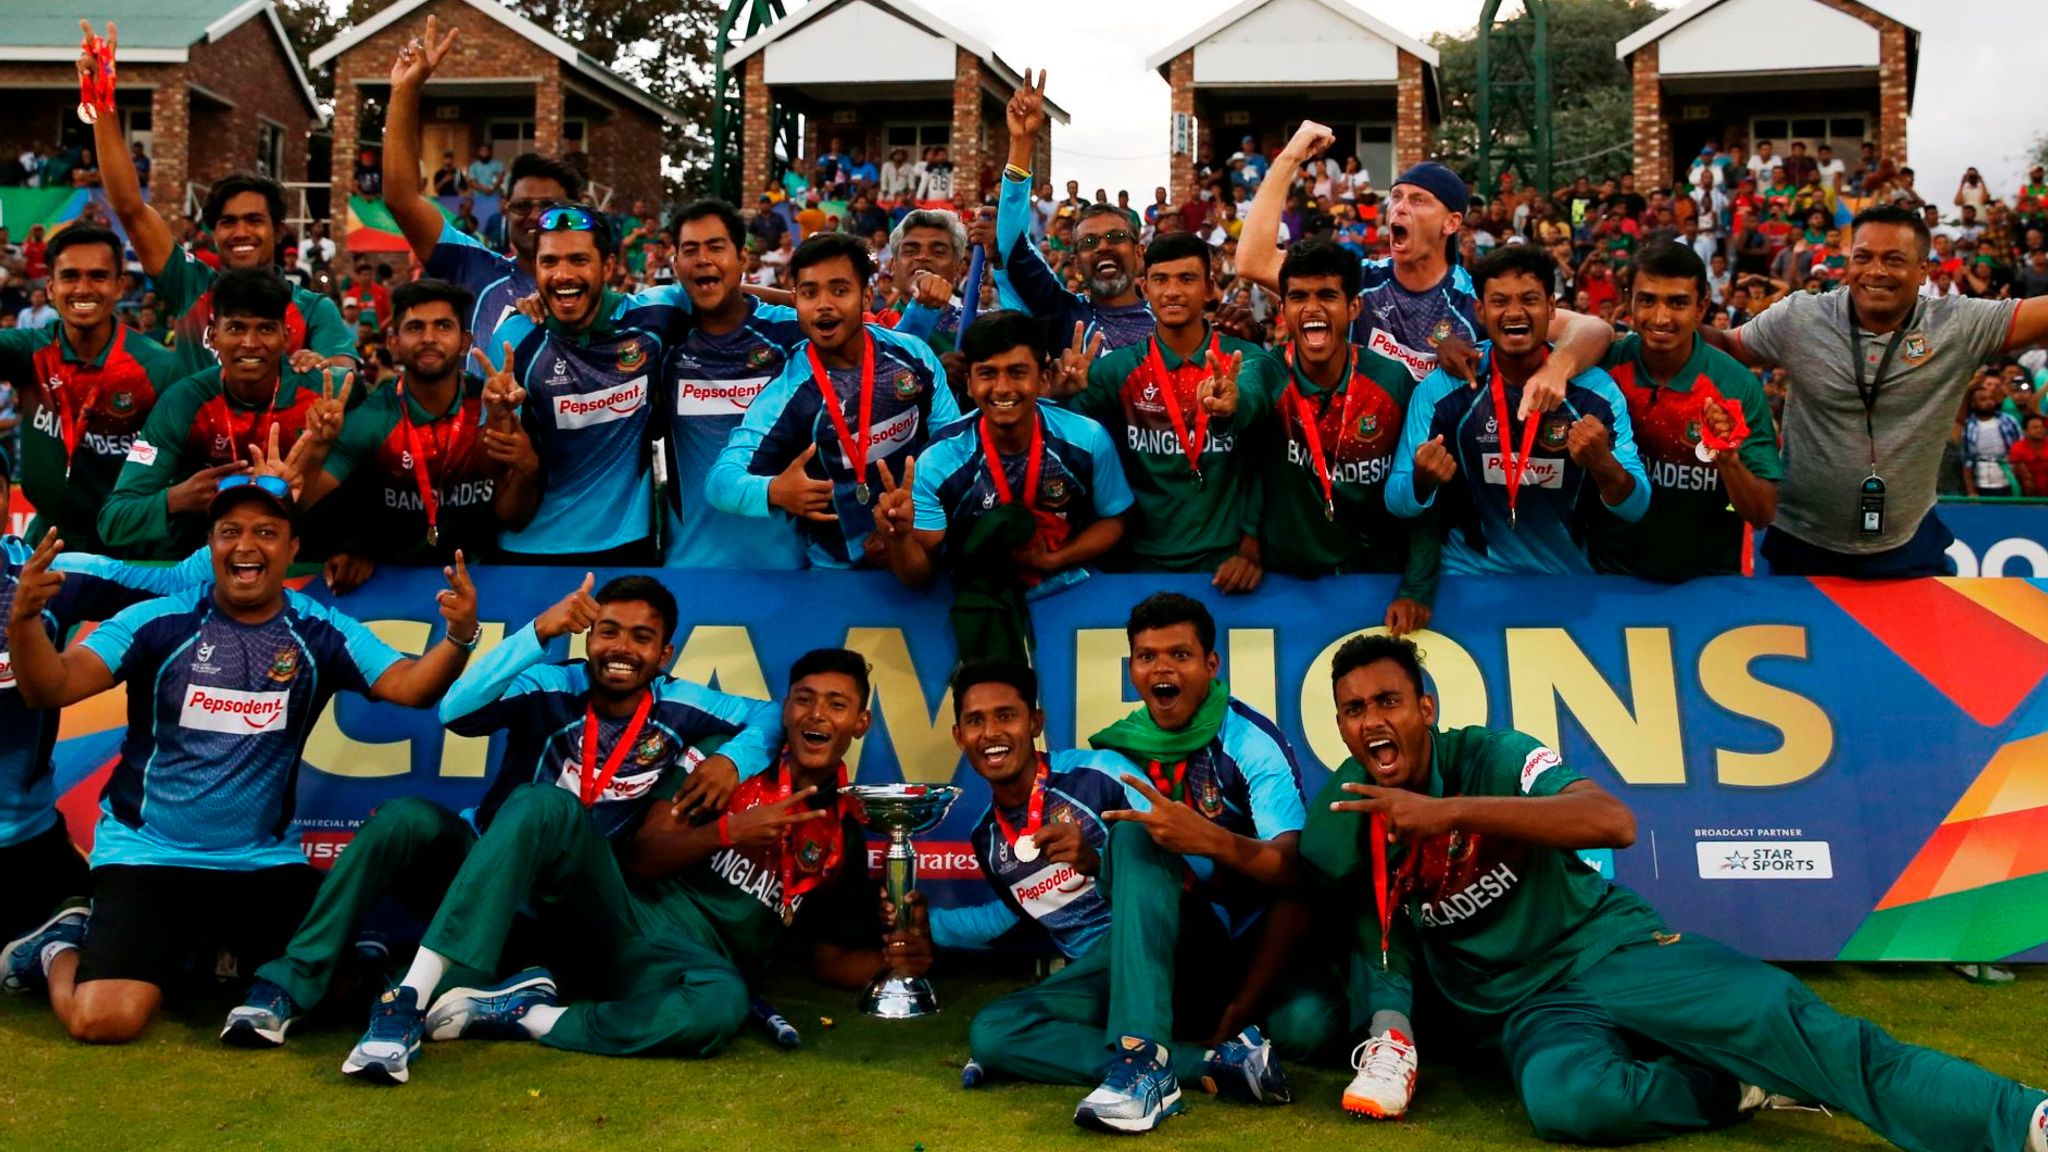 Bangladesh And India Players Sanctioned For U19 World Cup Final Brawl Cricket News Sky Sports